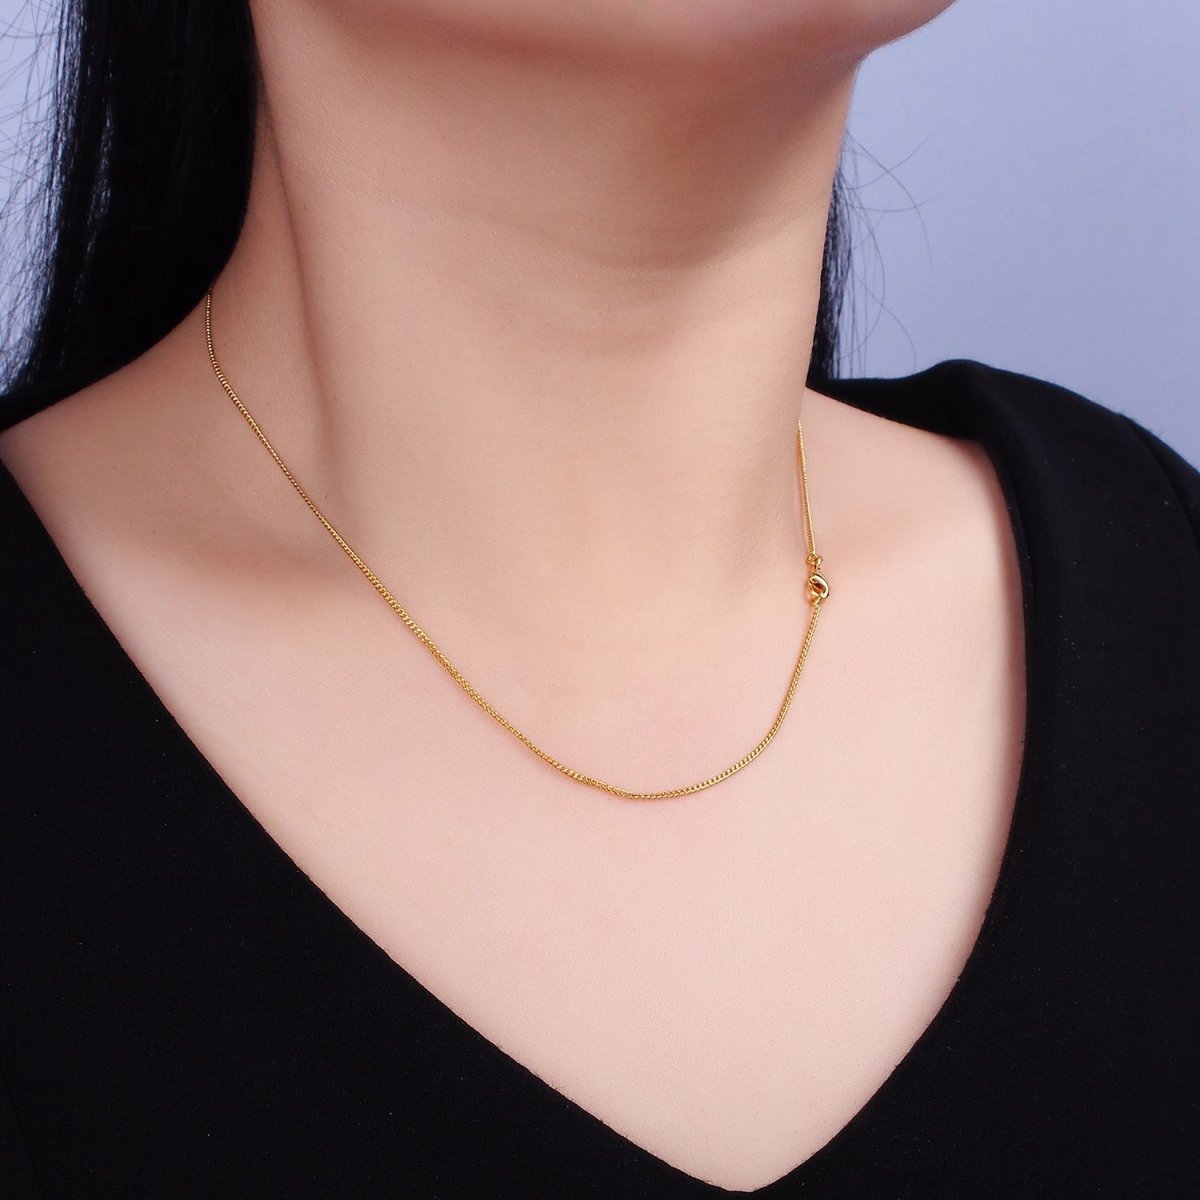 24K Gold Filled 1mm Cuban Curb 17.25 Inch Layering Chain Necklace w. Lobster Clasps, S-Hook Clasps Closure | WA-1882 WA-1883 Clearance Pricing - DLUXCA